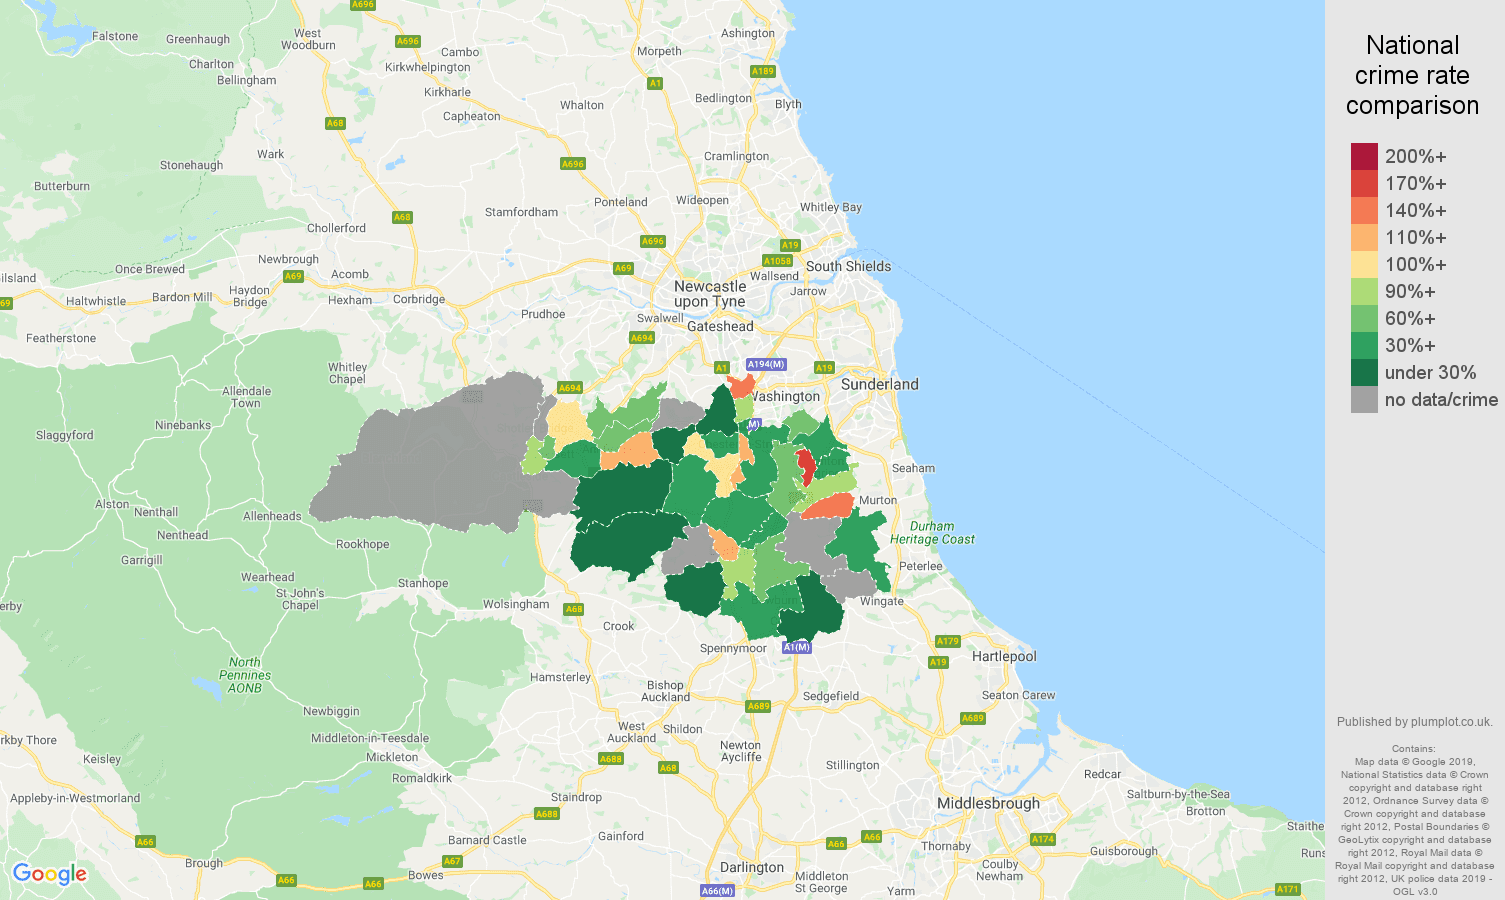 Durham possession of weapons crime rate comparison map